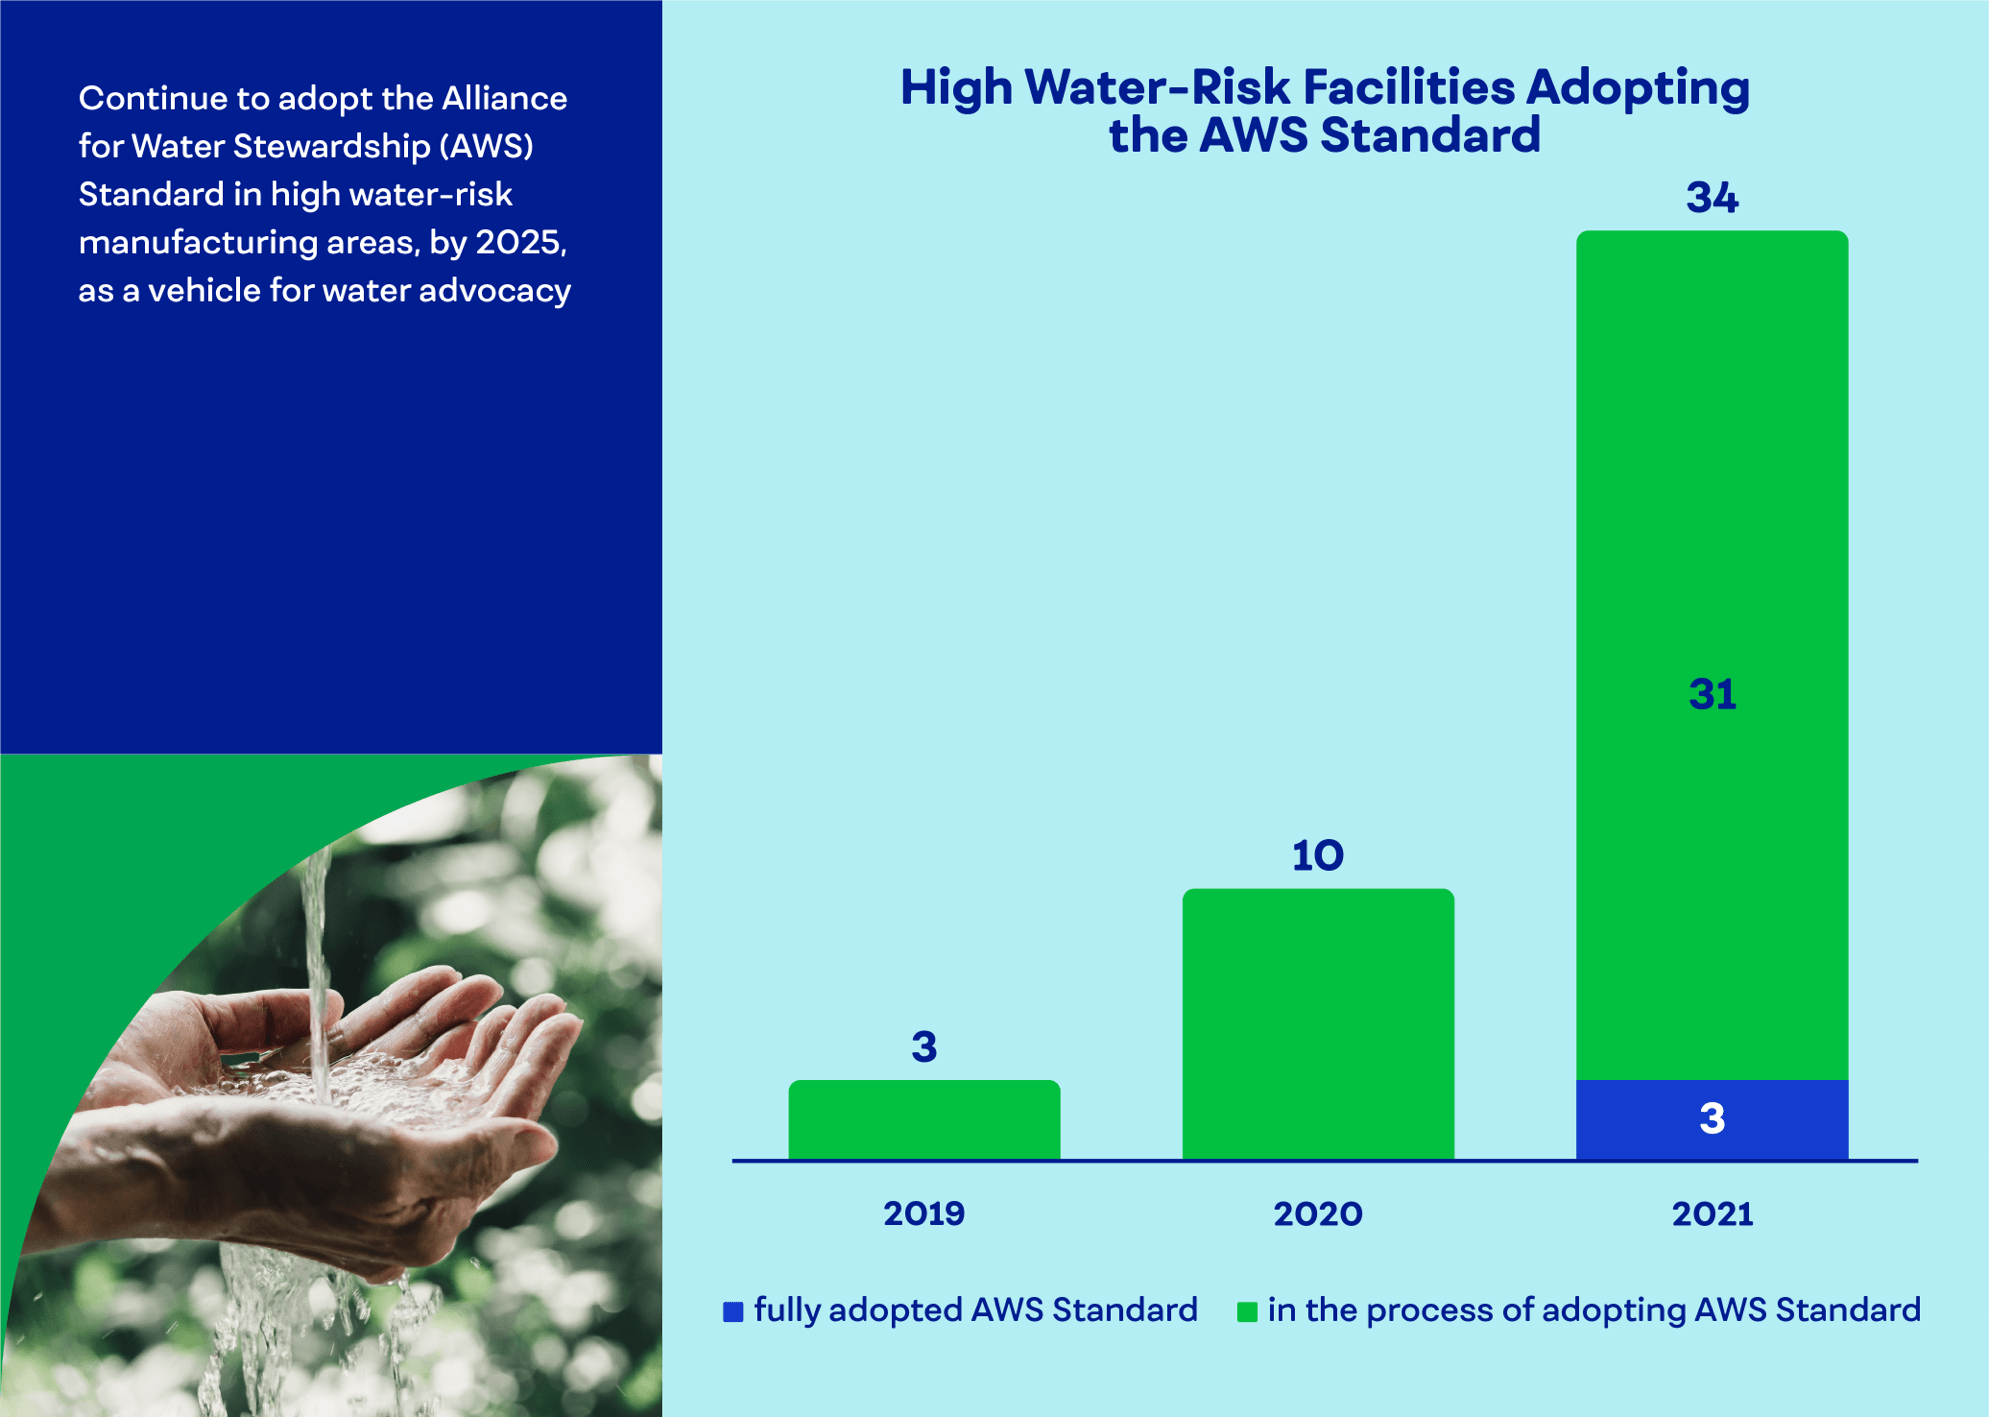 Continue to adopt the Alliance for Water Stewardship (AWS) Standard in high water-risk manufacturing areas, by 2025, as a vehicle for water advocacy